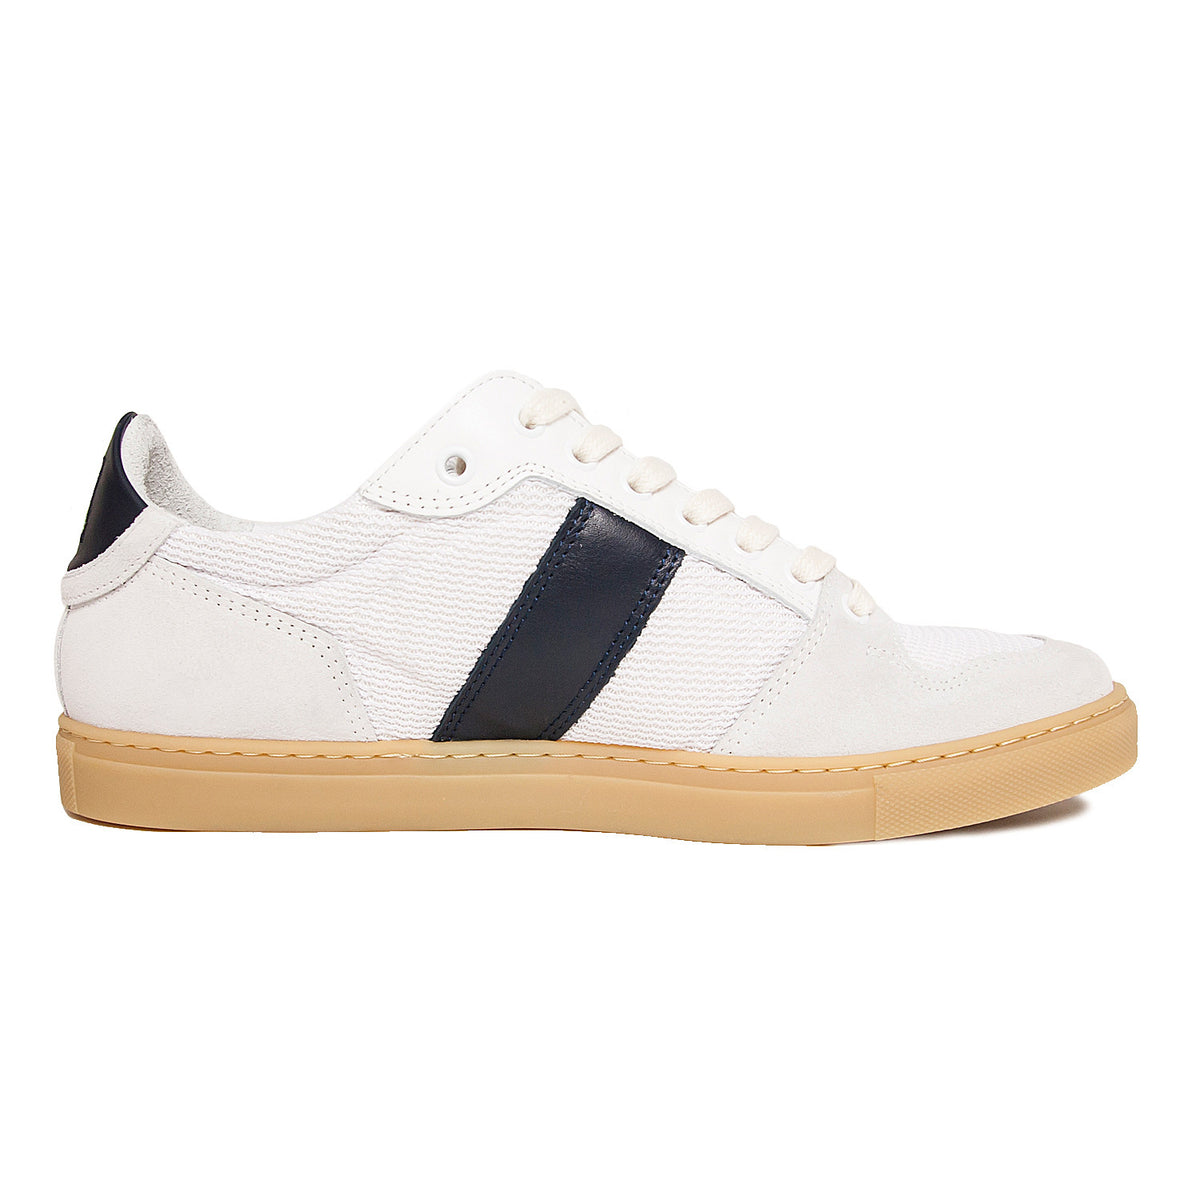 AMI - Low Top Trainers - Navy